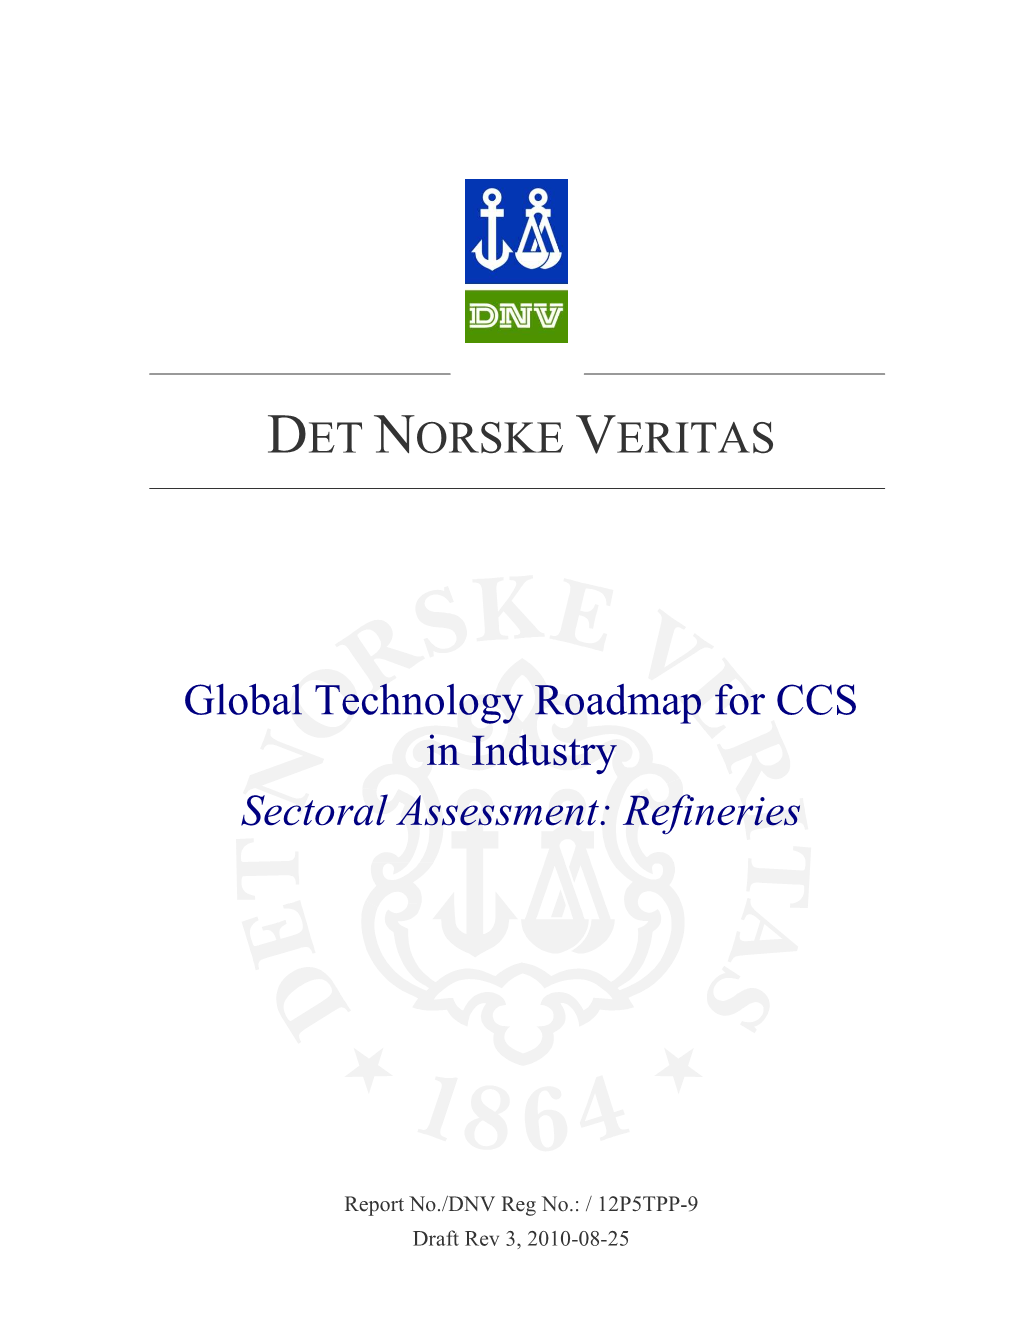 Global Technology Roadmap for CCS in Industry Sectoral Assessment: Refineries